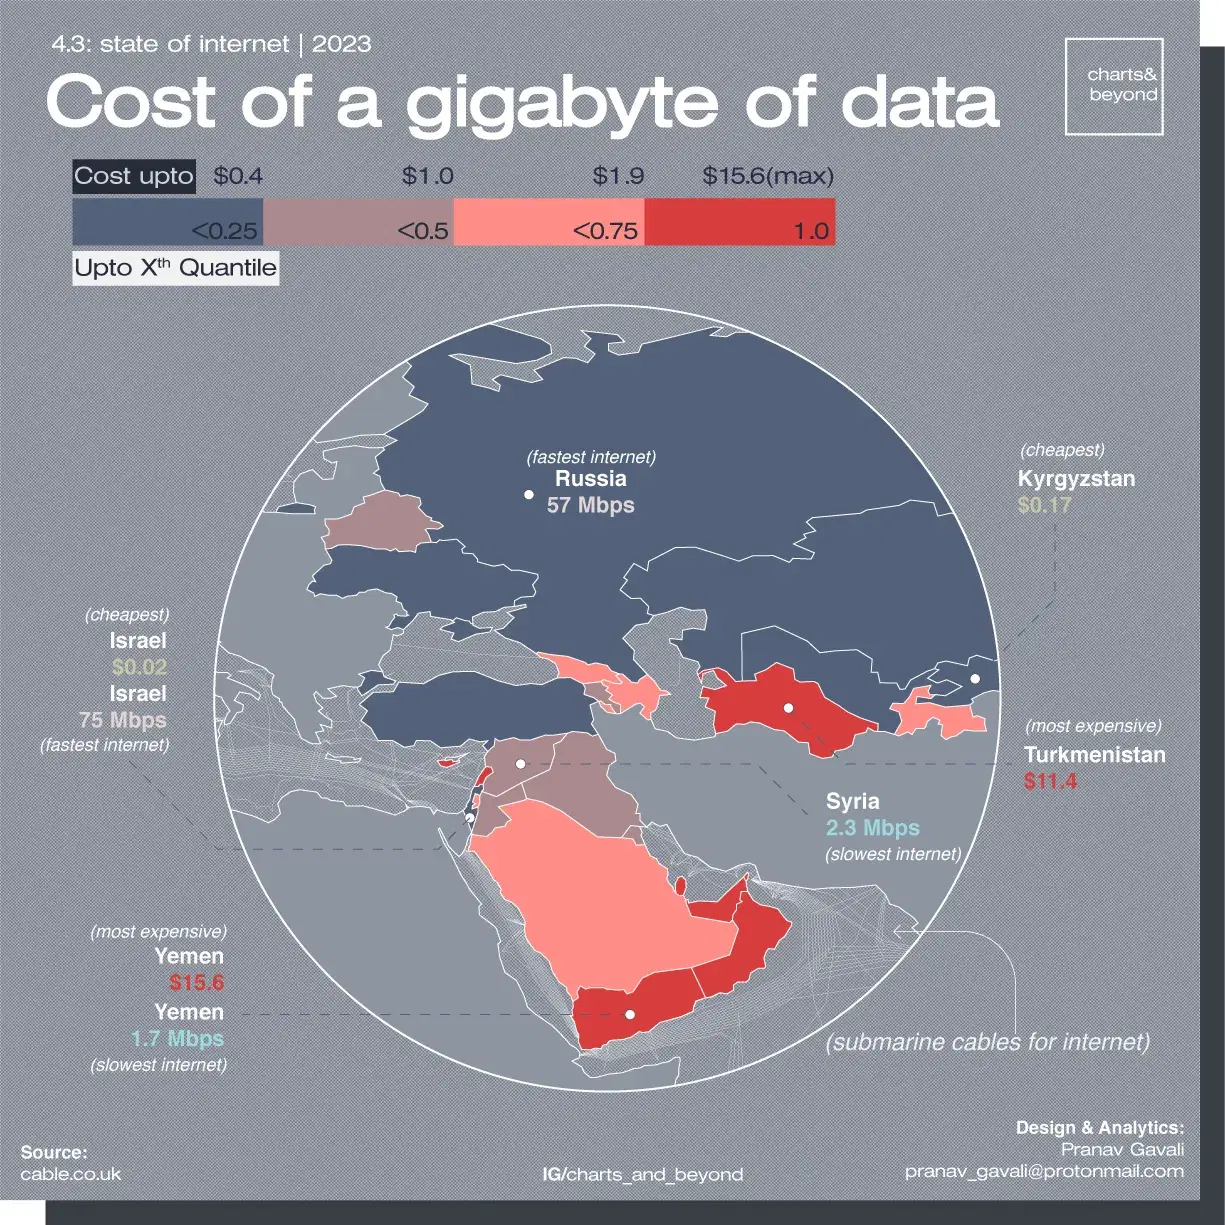 Middle East & CIS (Former CIS) : Cost of 1GB Data